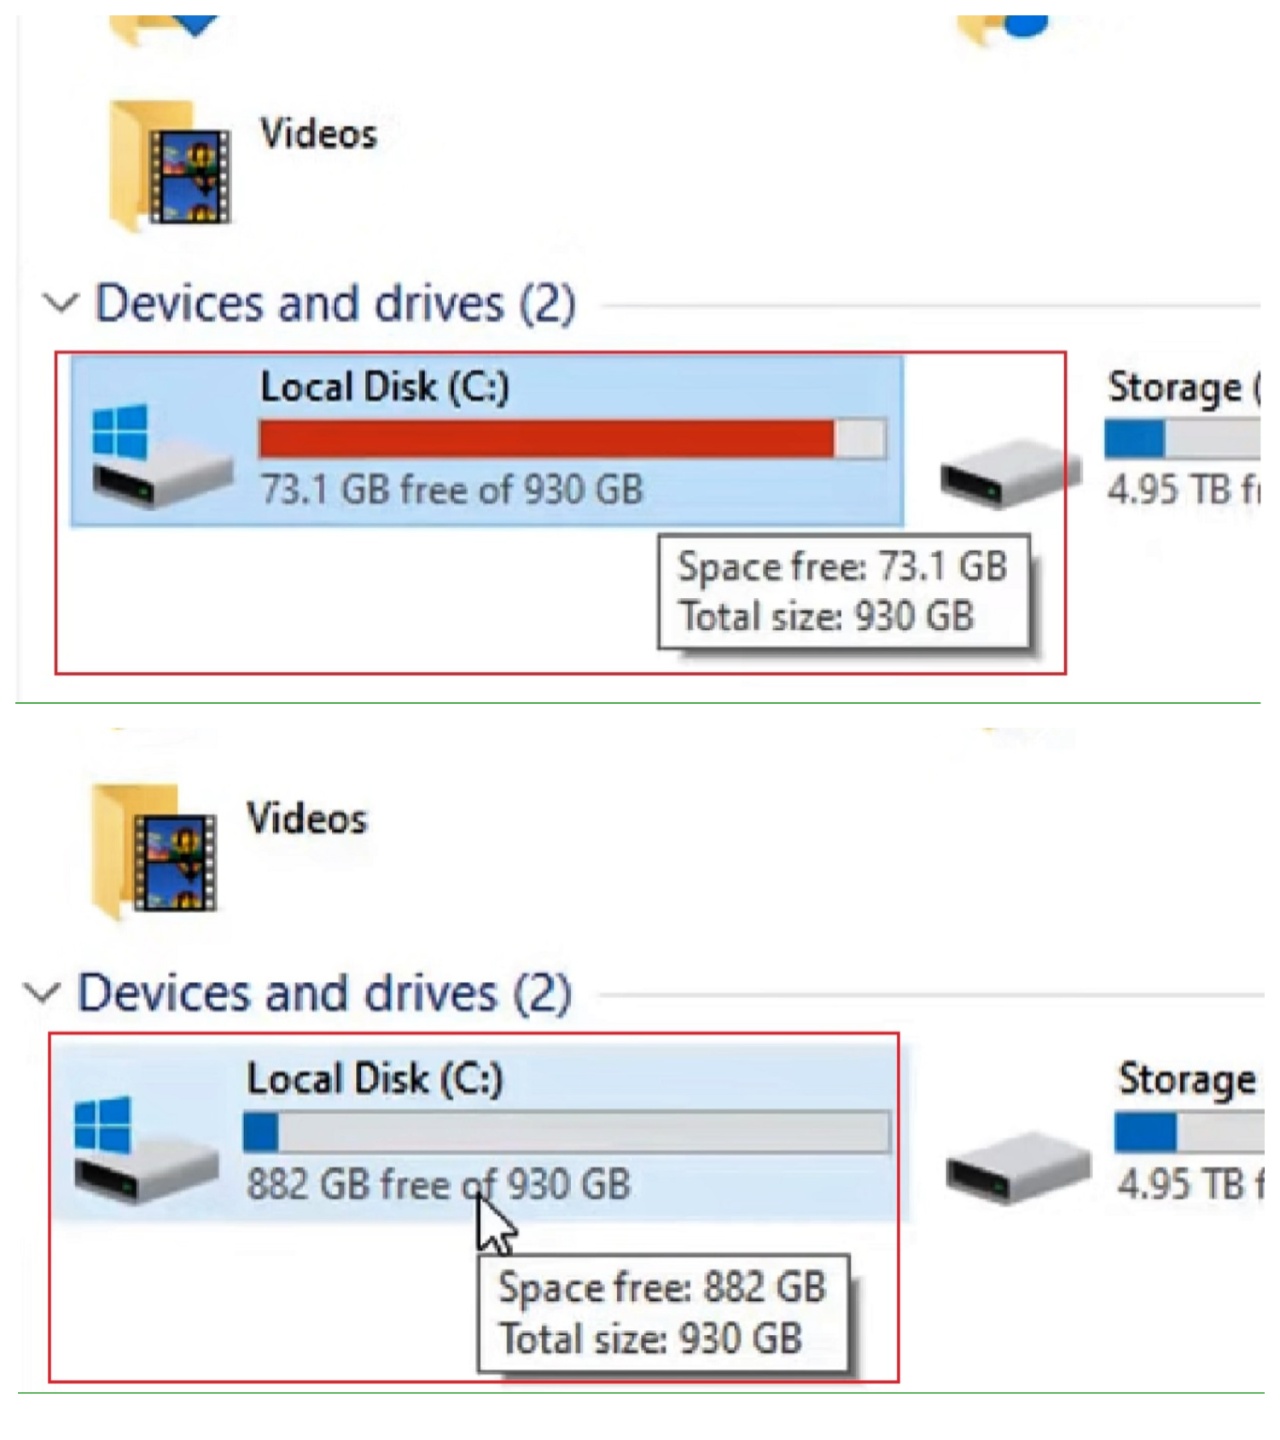 Notice the difference of free space